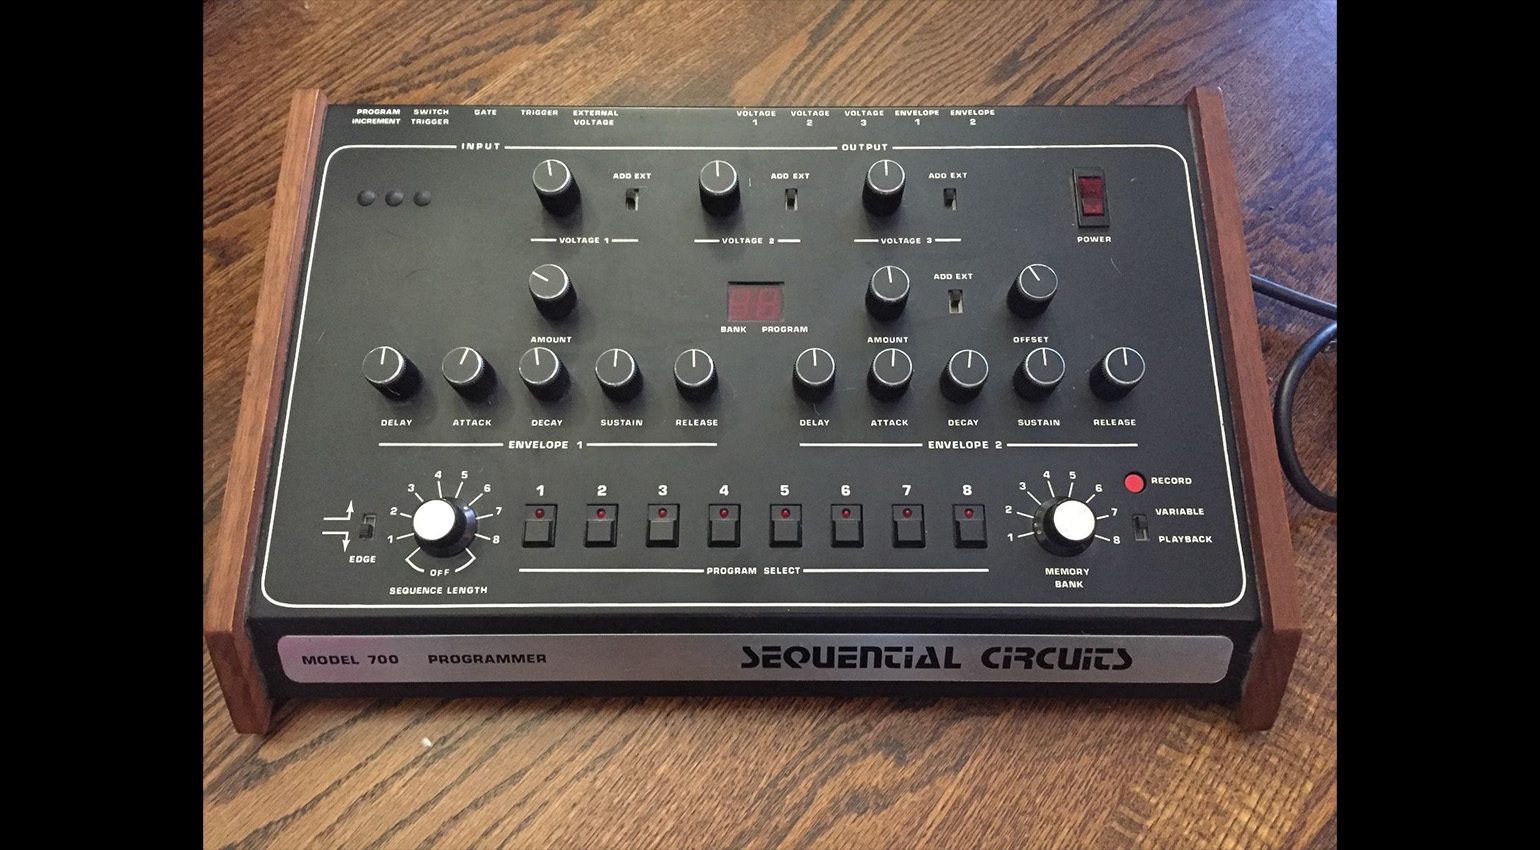 Sequential Circuits Model 700 Programmer